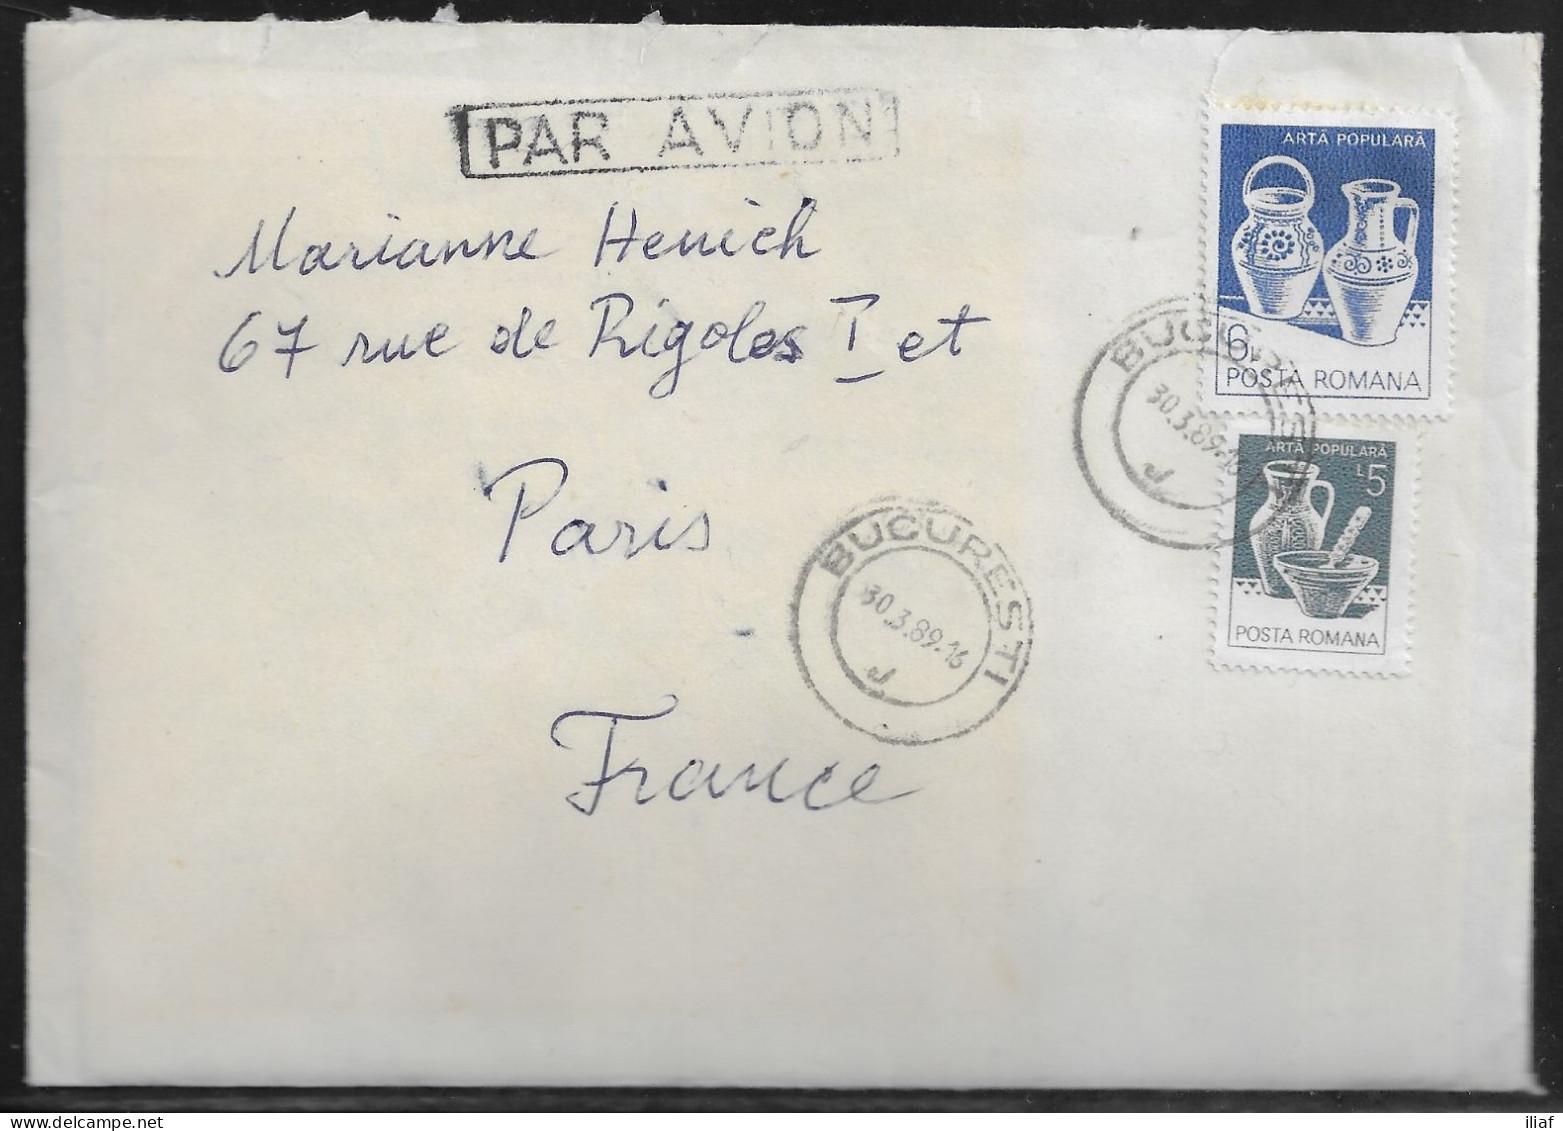 Romania. Stamps Sc. 3109-3110 On Air Mail Letter, Sent From Bucharest On 30.03.1989 To France. Letter Inside - Covers & Documents